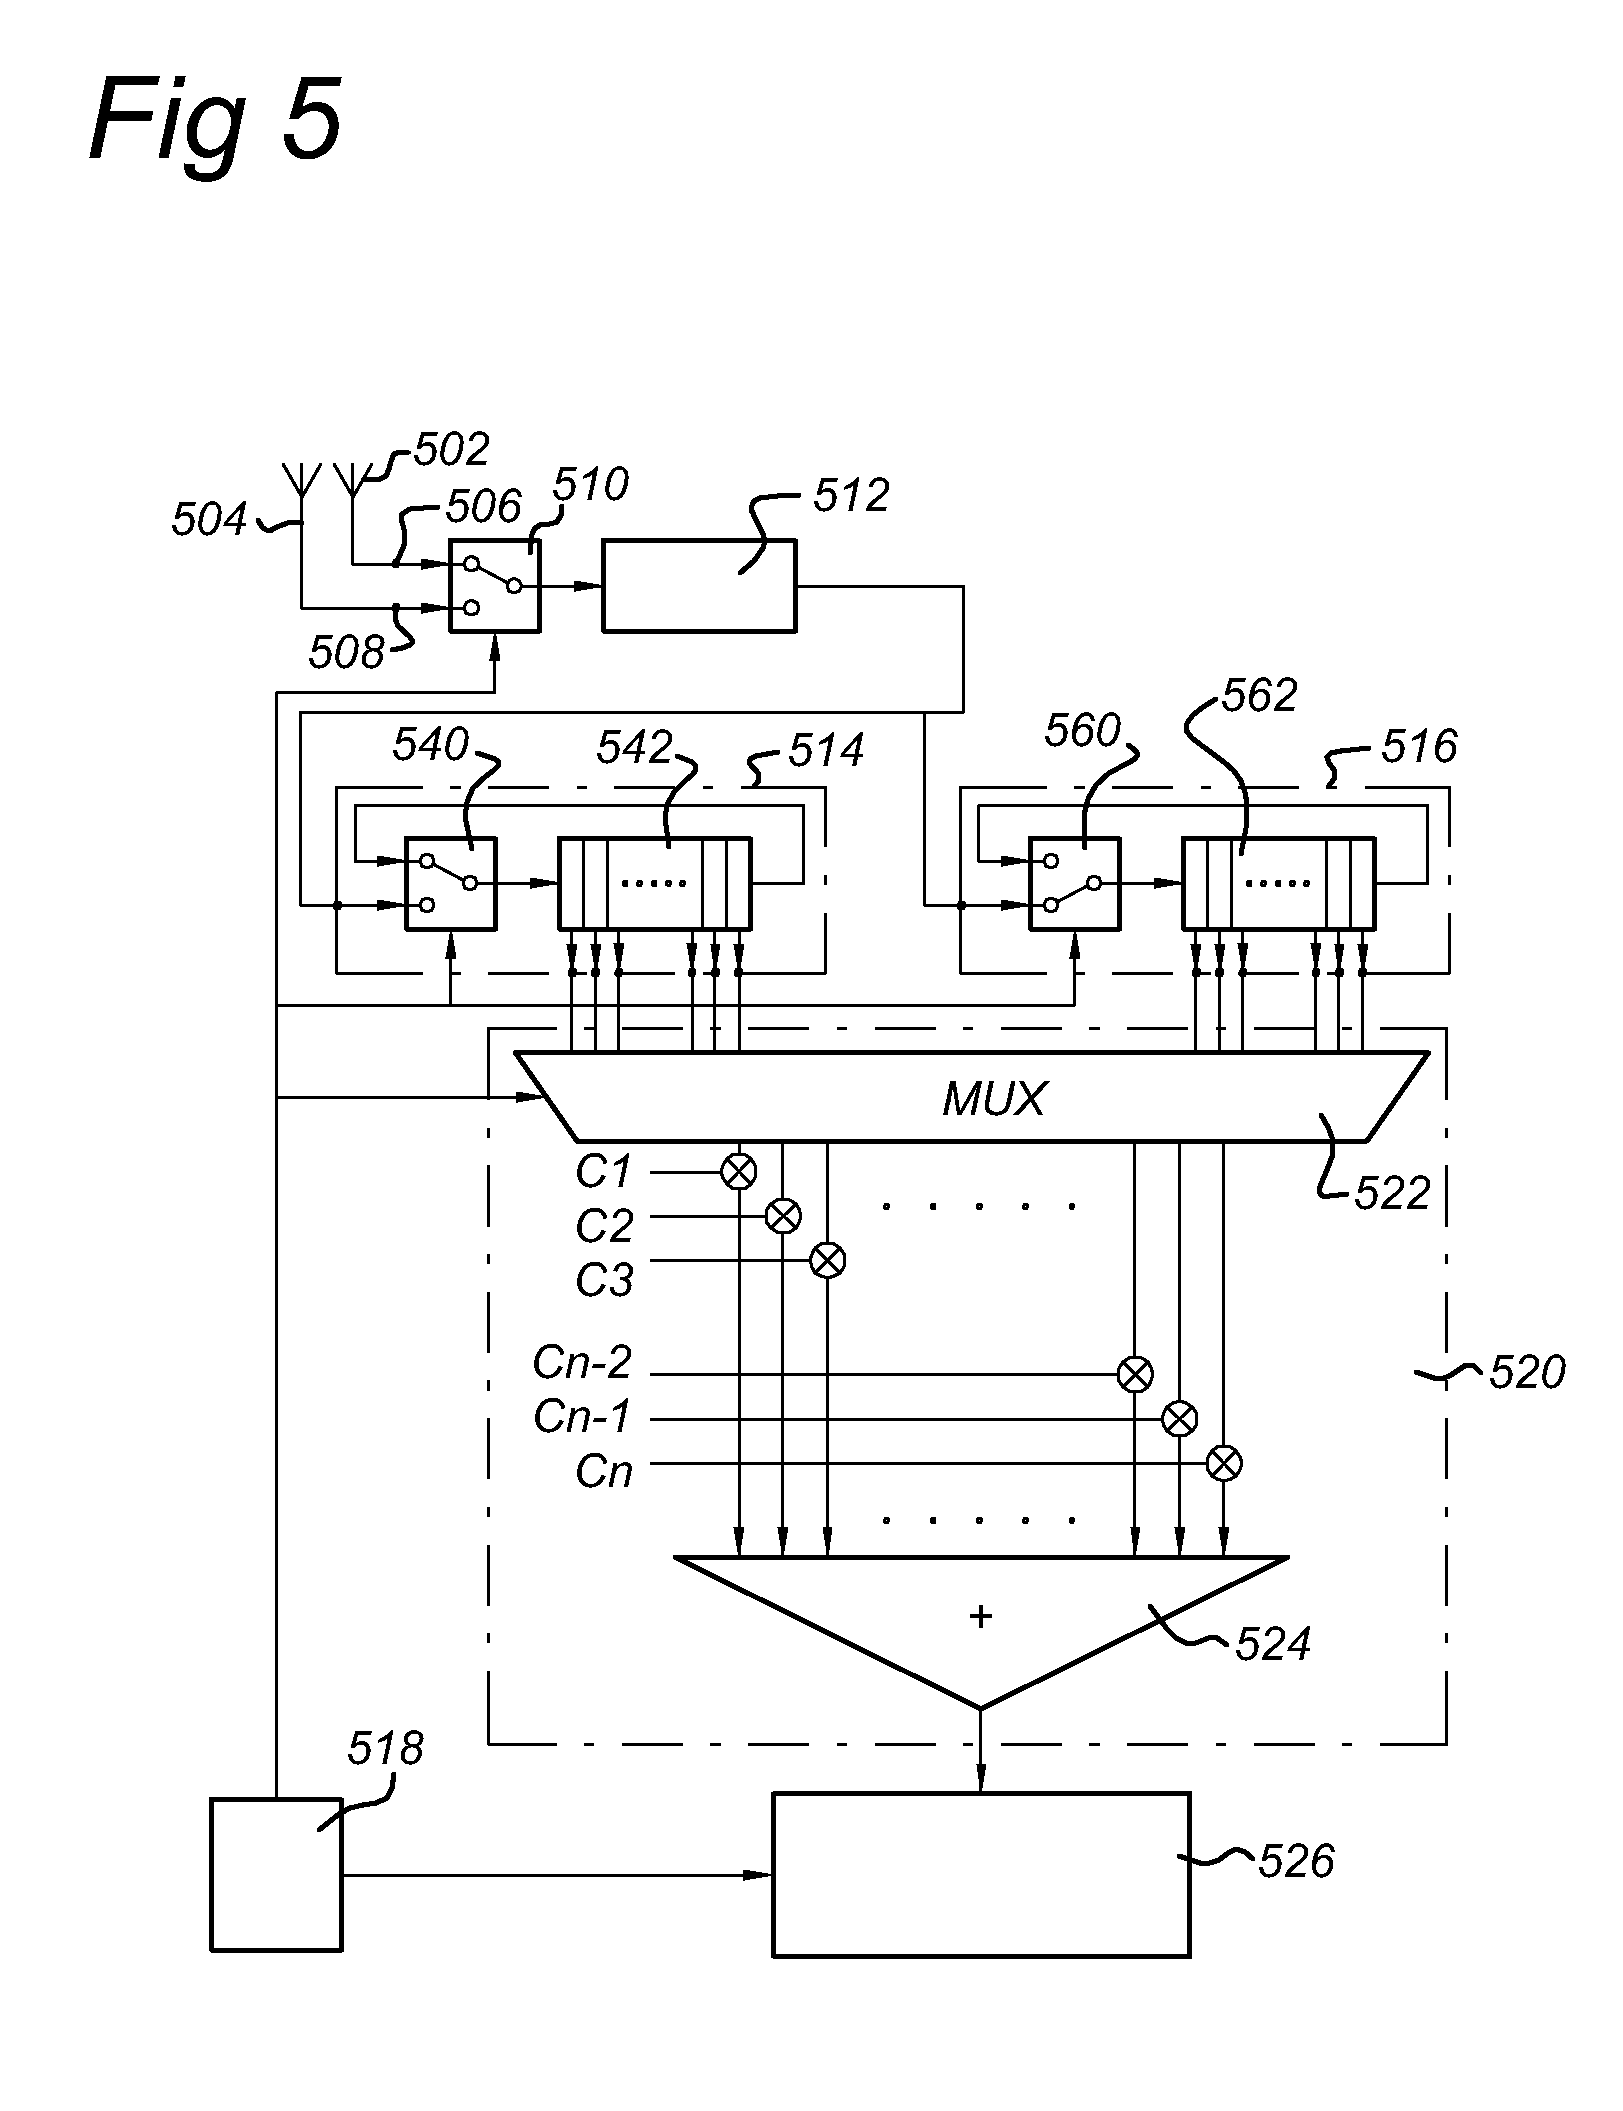 Arrangement for determining a characteristic form of an input signal